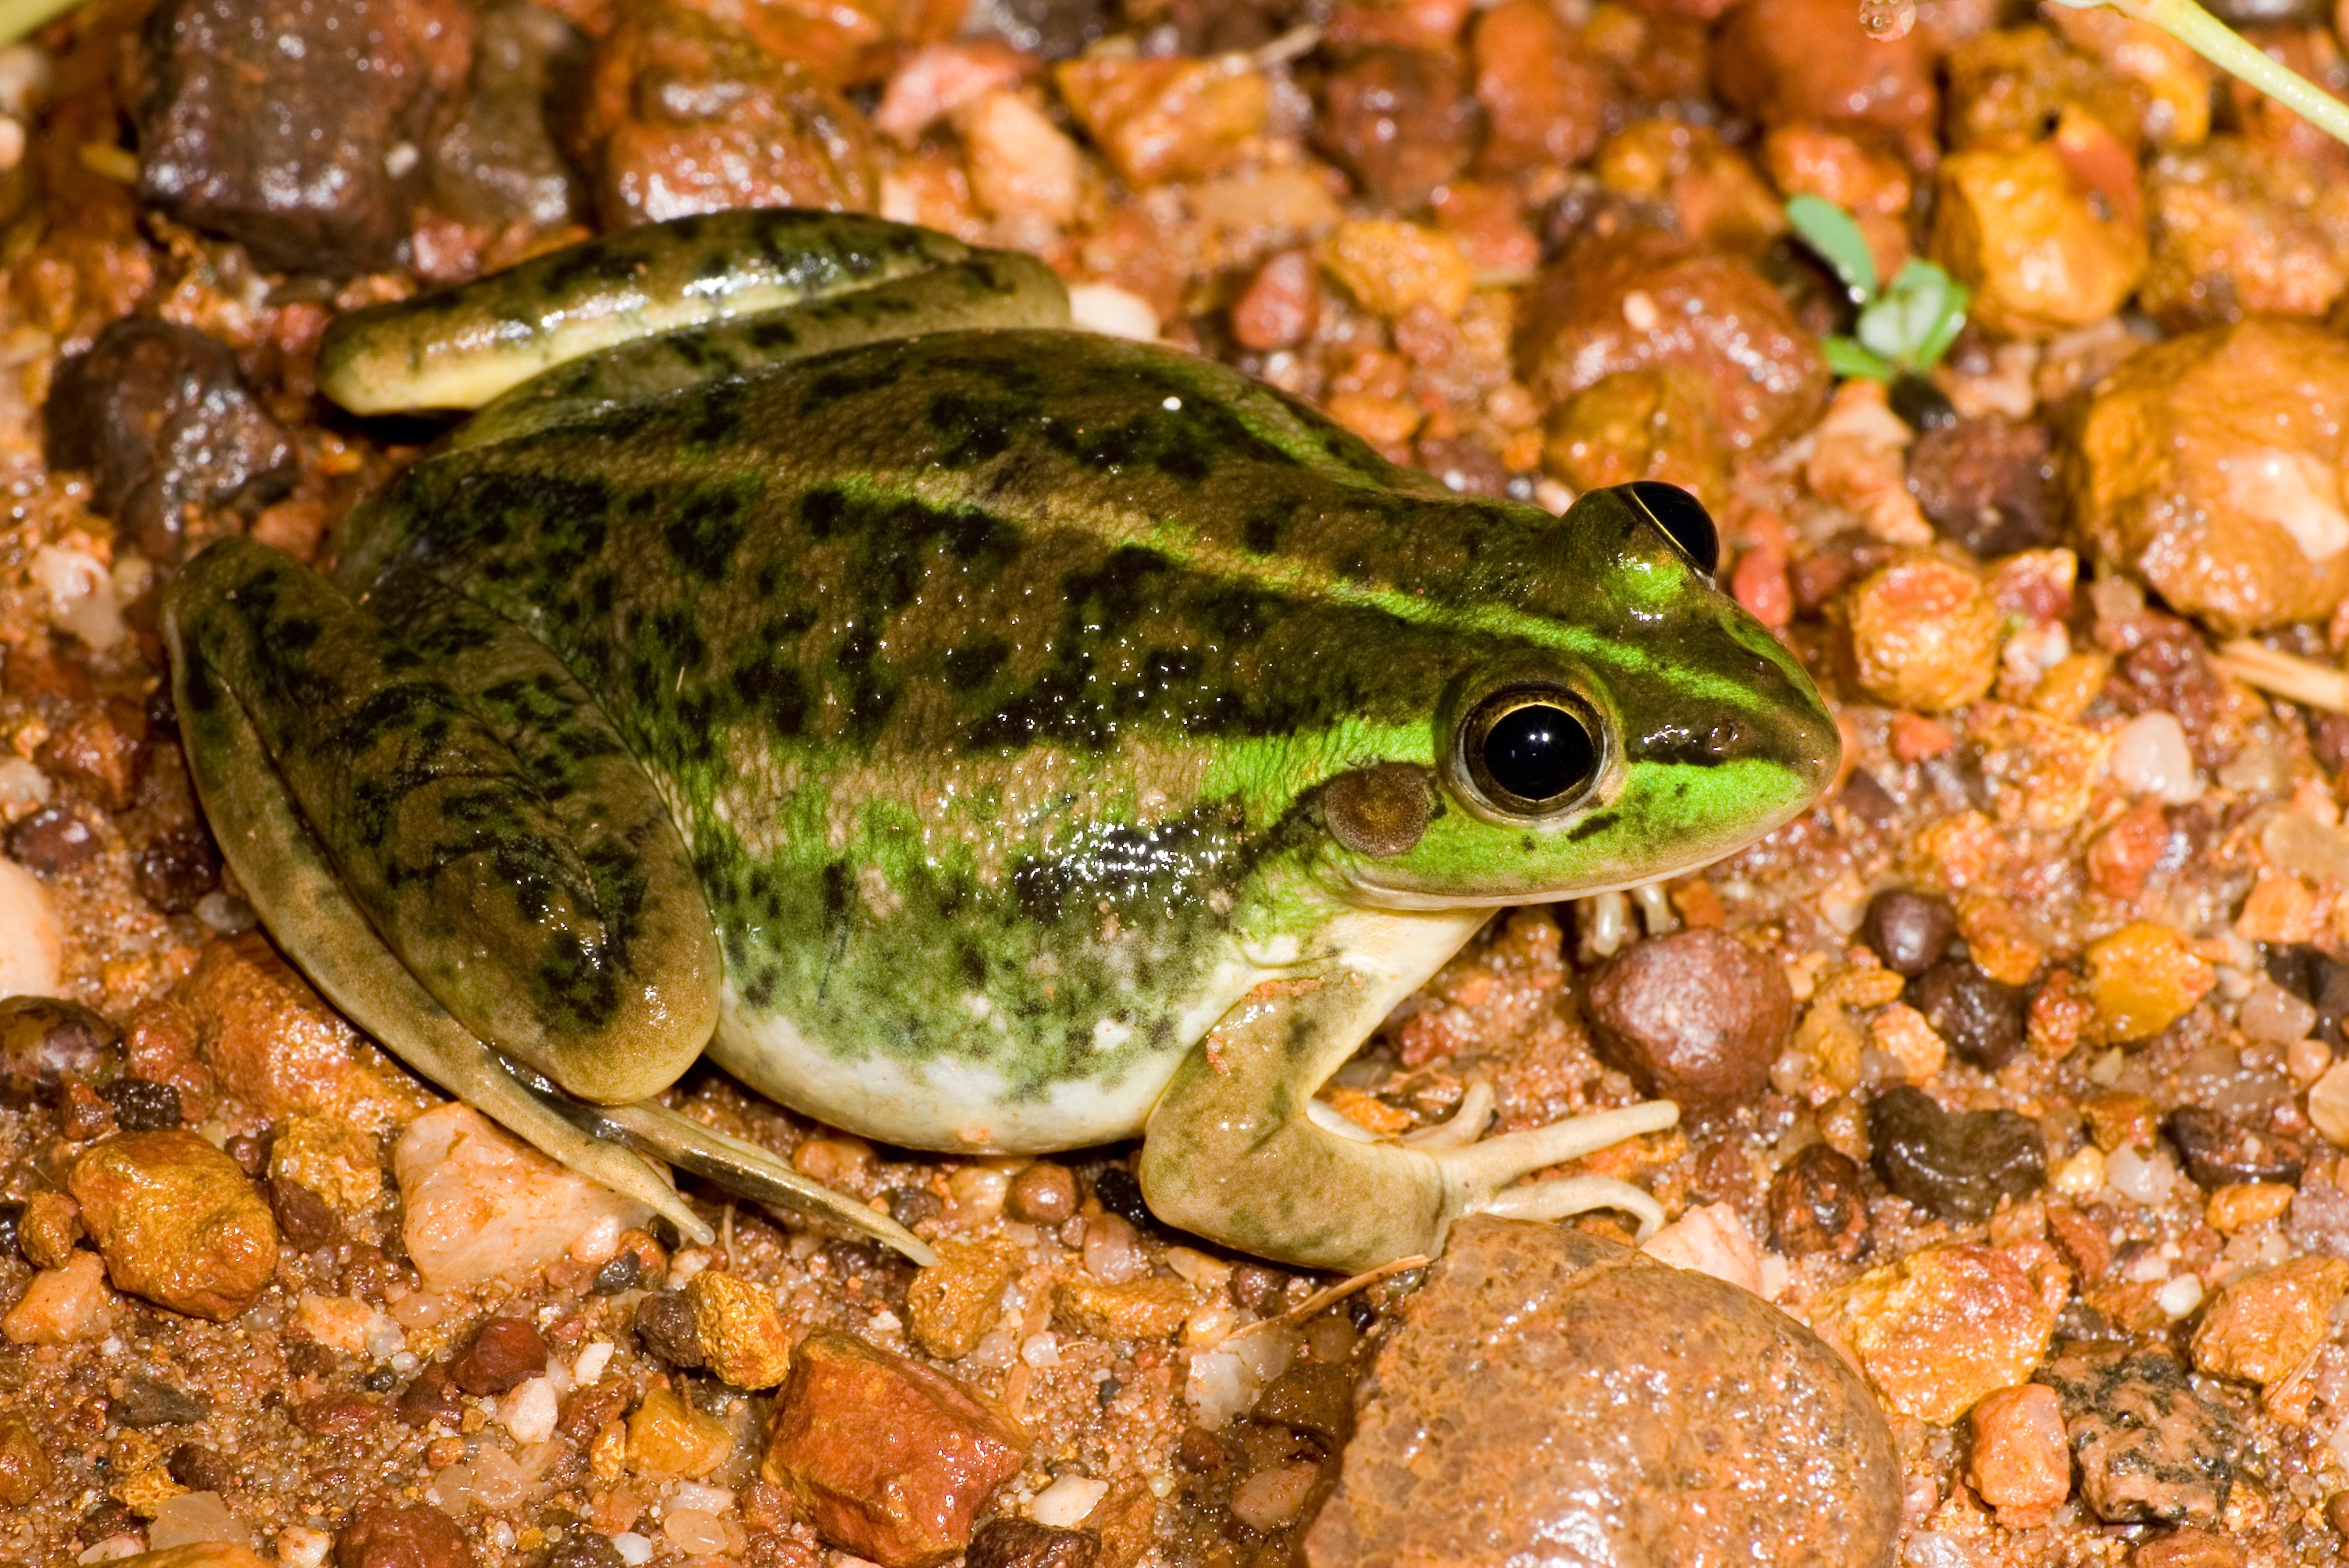 Dahl's aquatic frog was supposed to be able to eat cane toads and survive - but it can't. 